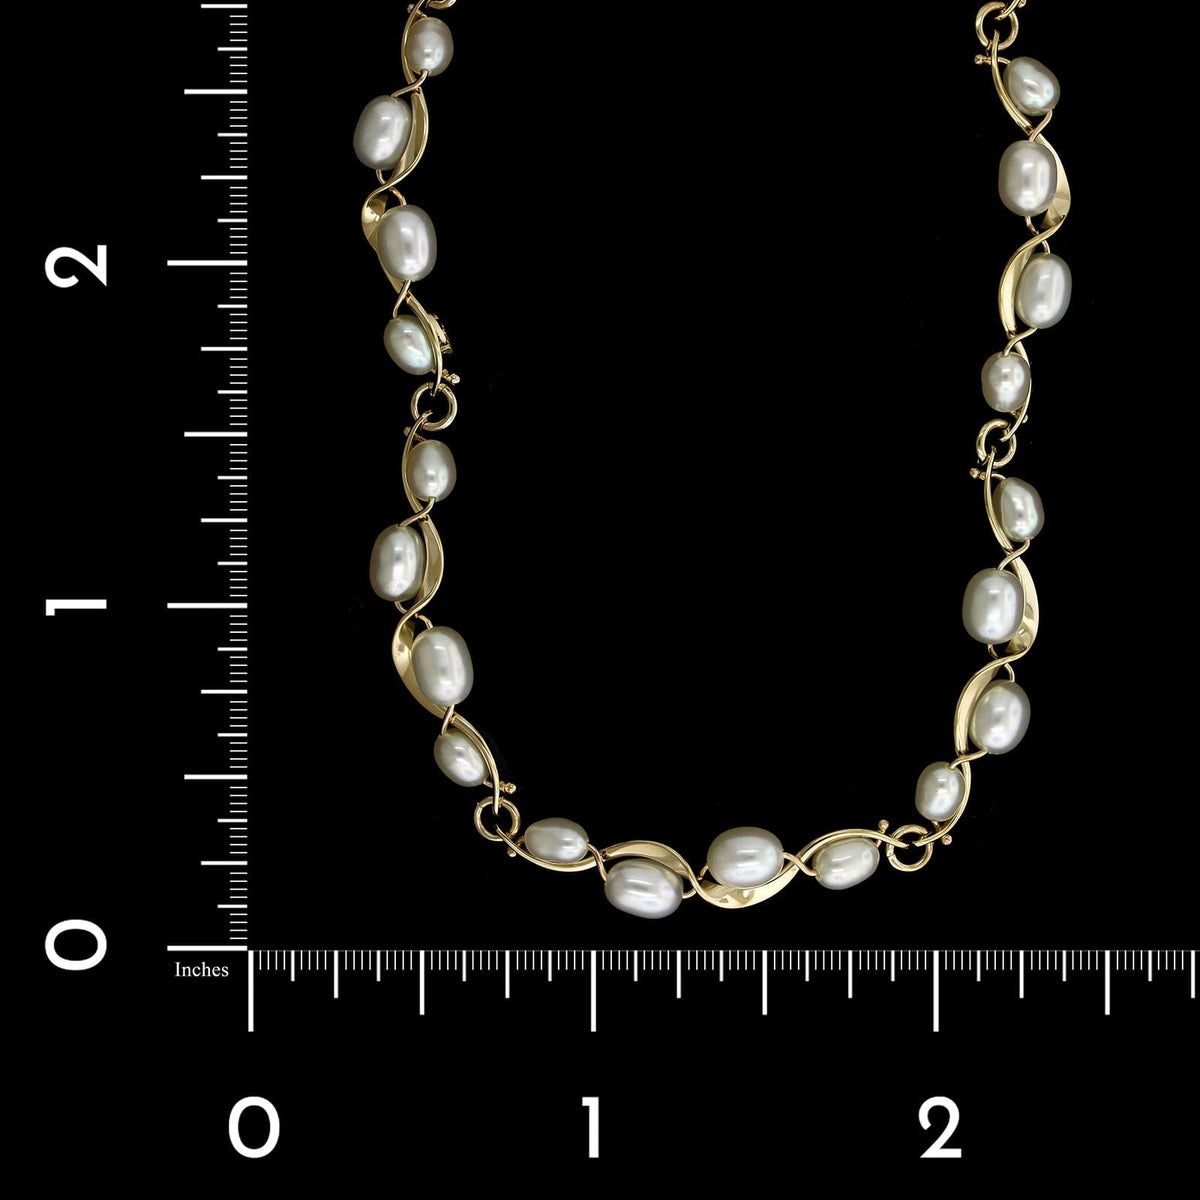 Tom Kruskal 14K Yellow Gold Estate Cultured Freshwater Pearl Ruffle Necklace